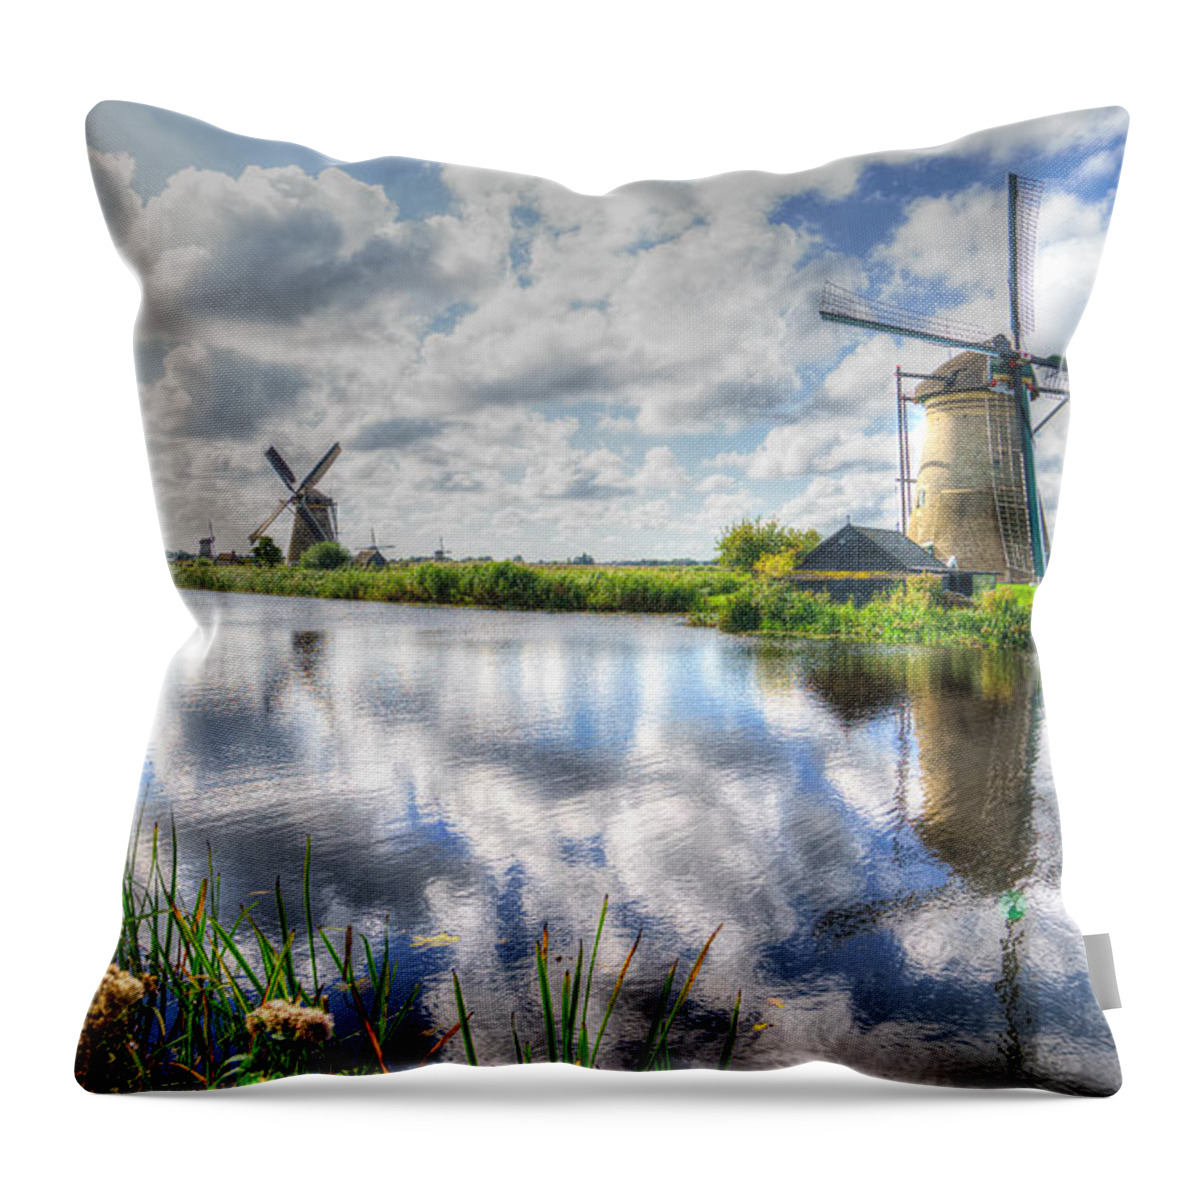 Windmills Throw Pillow featuring the photograph Kinderdijk by Uri Baruch